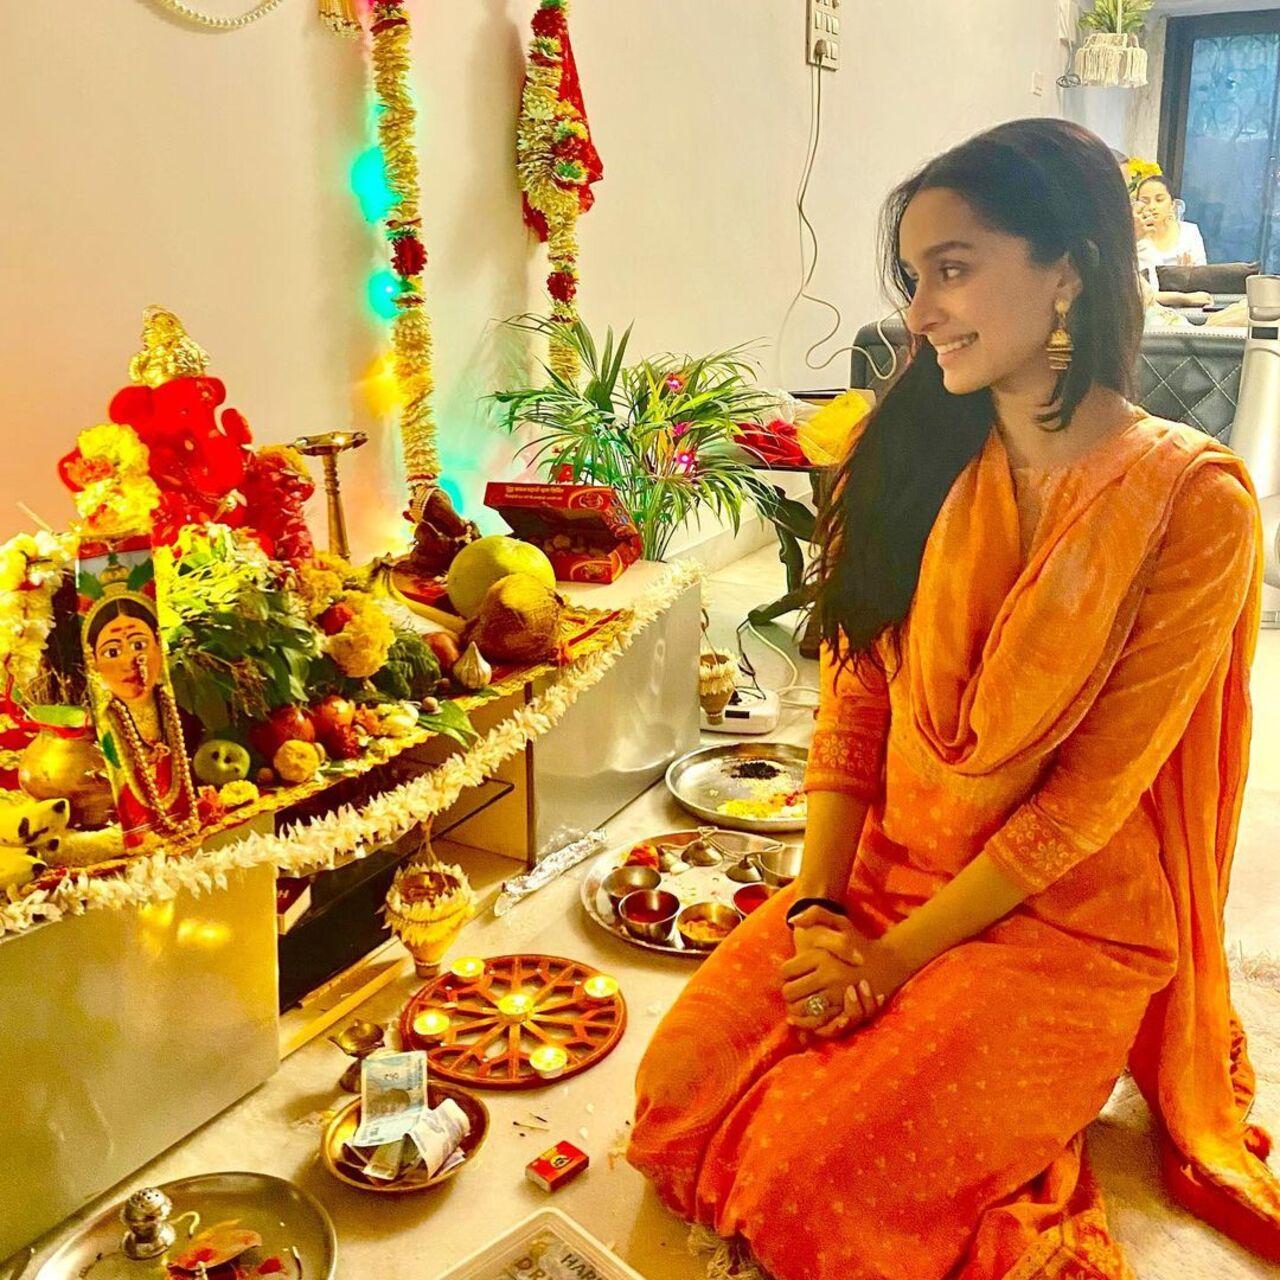 Shraddha Kapoor's Ganesh Chaturthi celebration calls for a family reunion. From prayers to relishing delicious food, the Kapoor-Kolhapure family celebrate it with joy